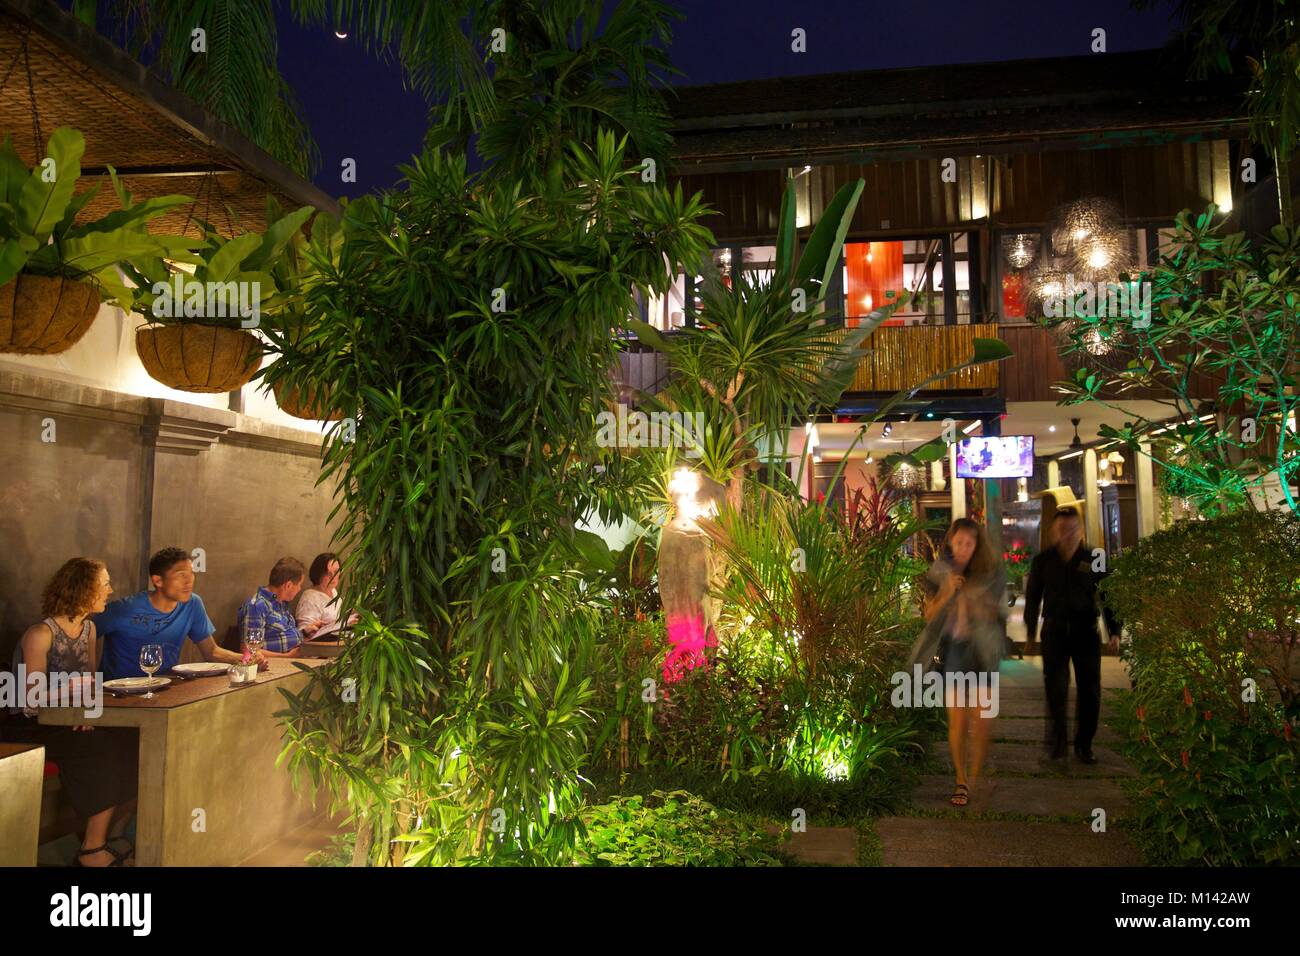 Cambodia, Siem Reap, guests in the garden of the khmer cuisine restaurant Chanrey tree lit at night Stock Photo